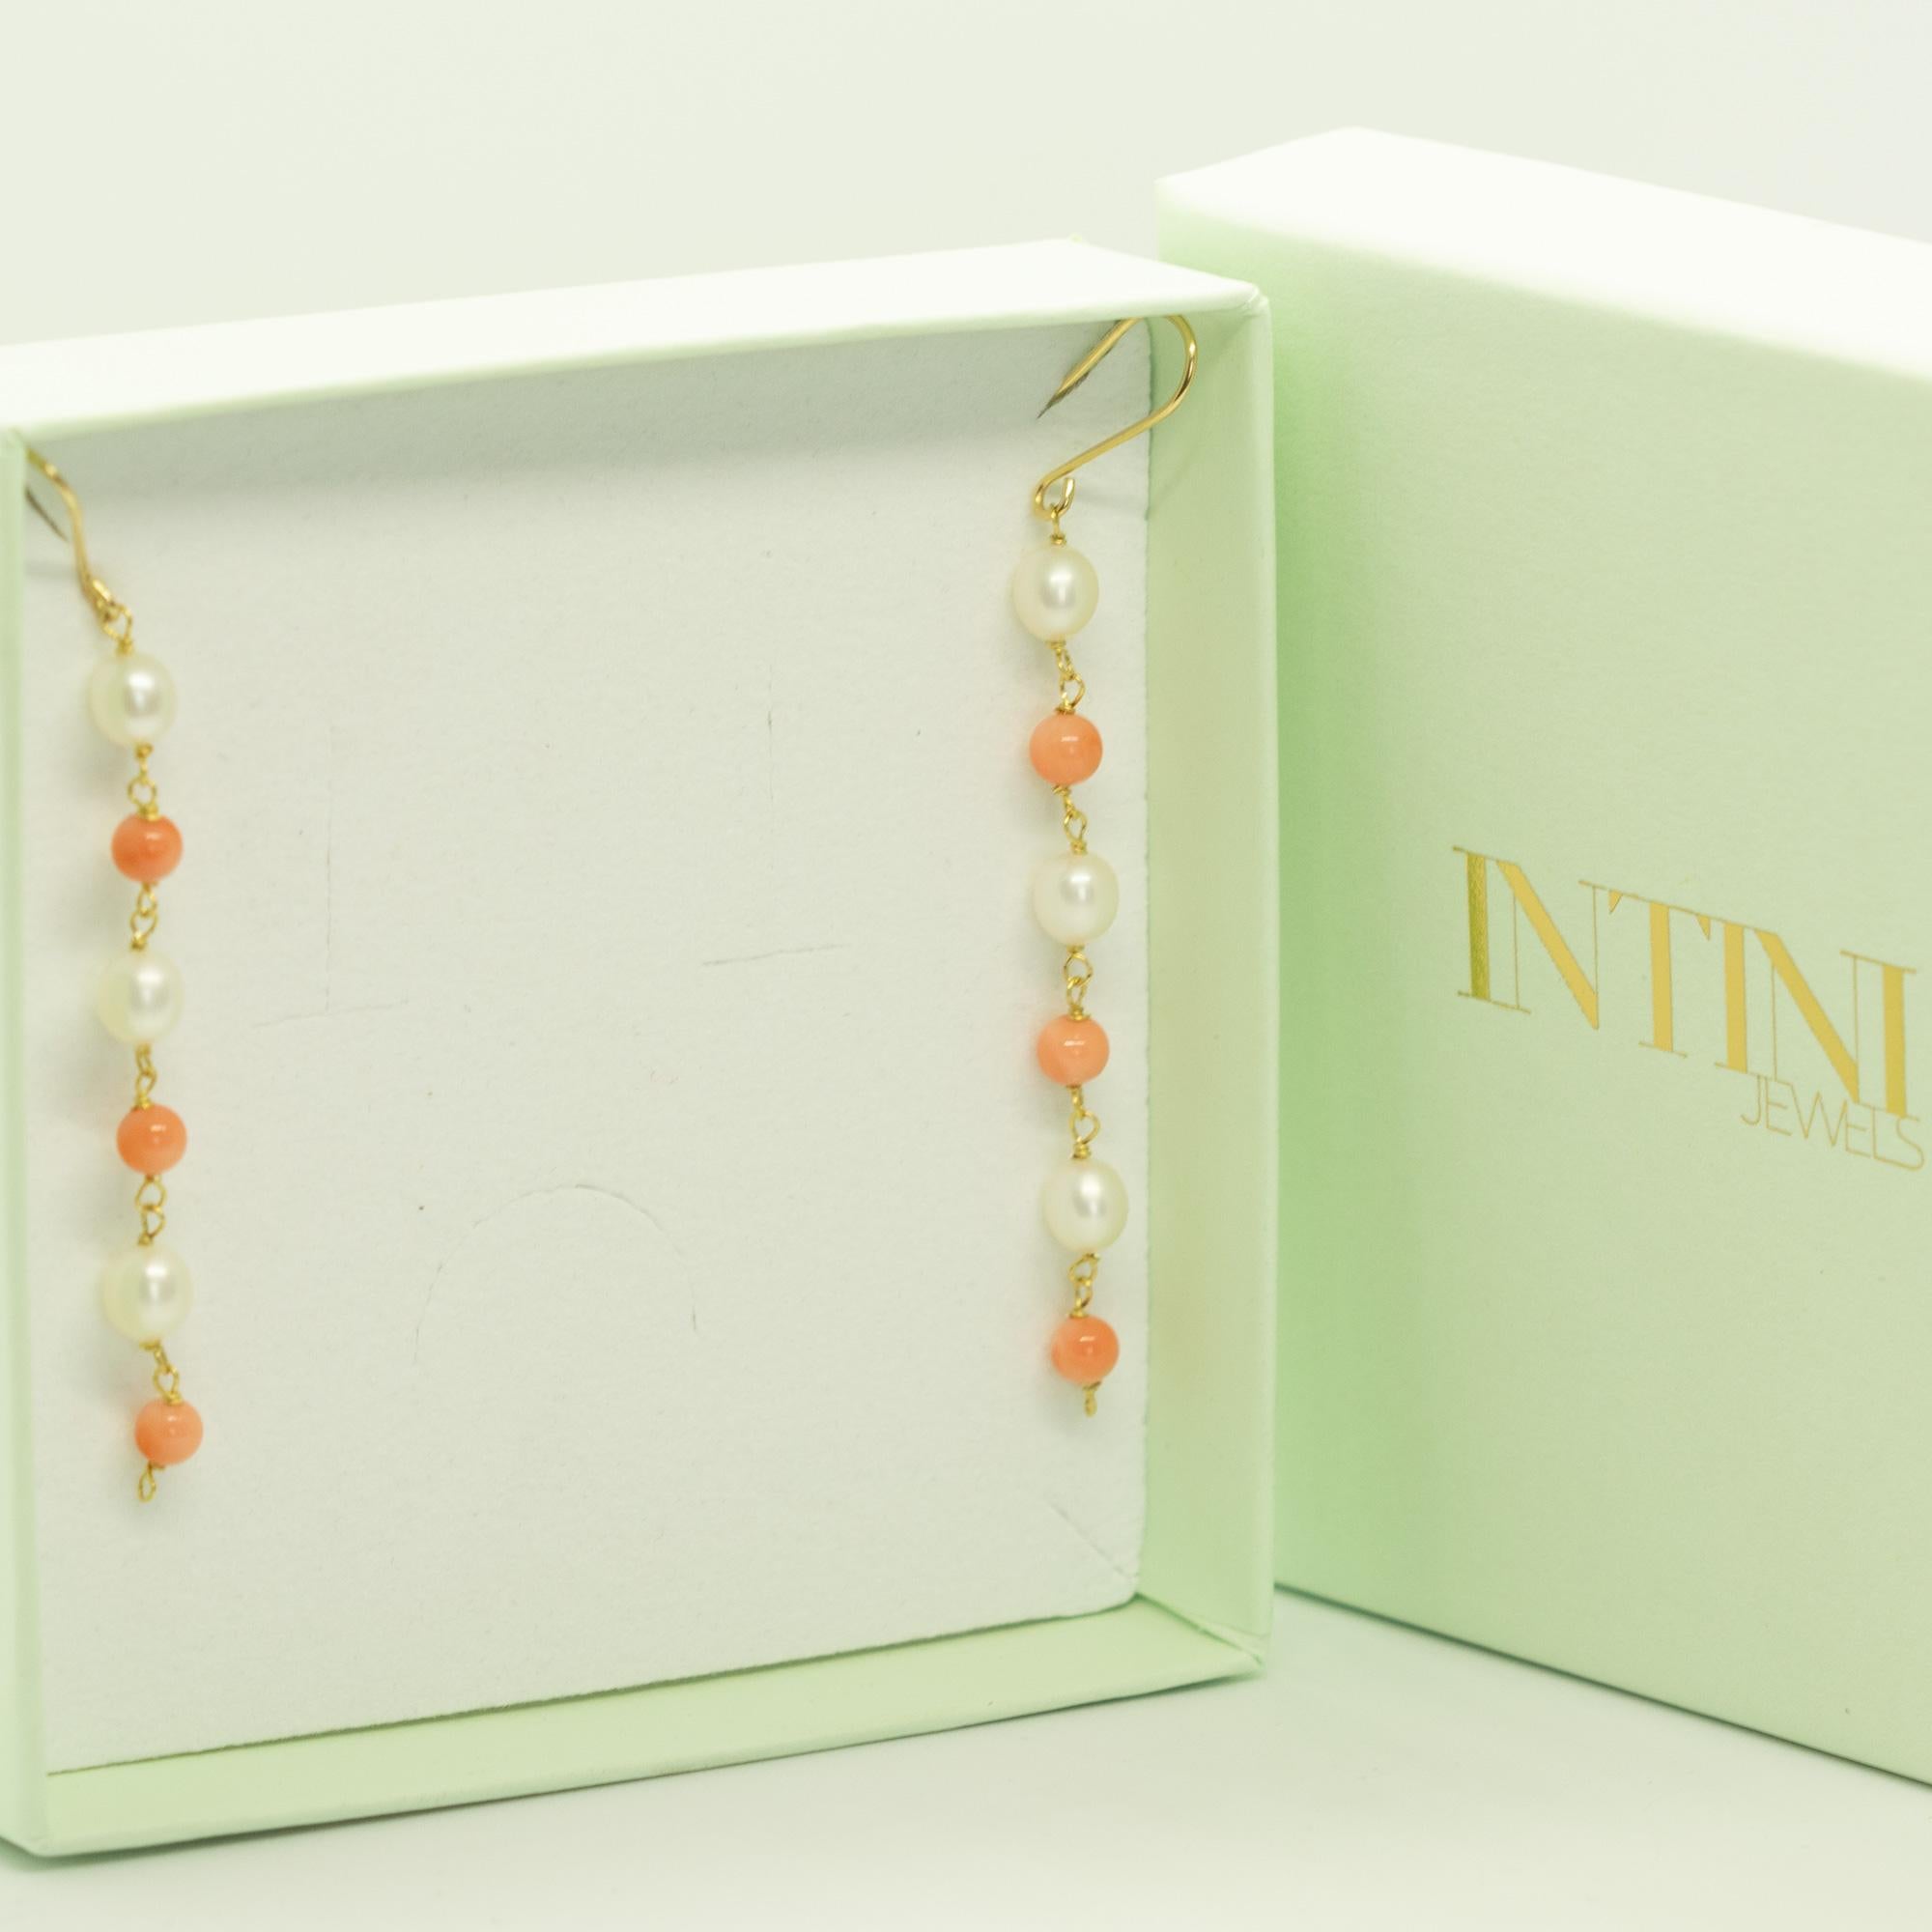 Intini Jewels 18K Yellow Gold Natural Pink Coral Pearls Deco Chandelier Earrings For Sale 1